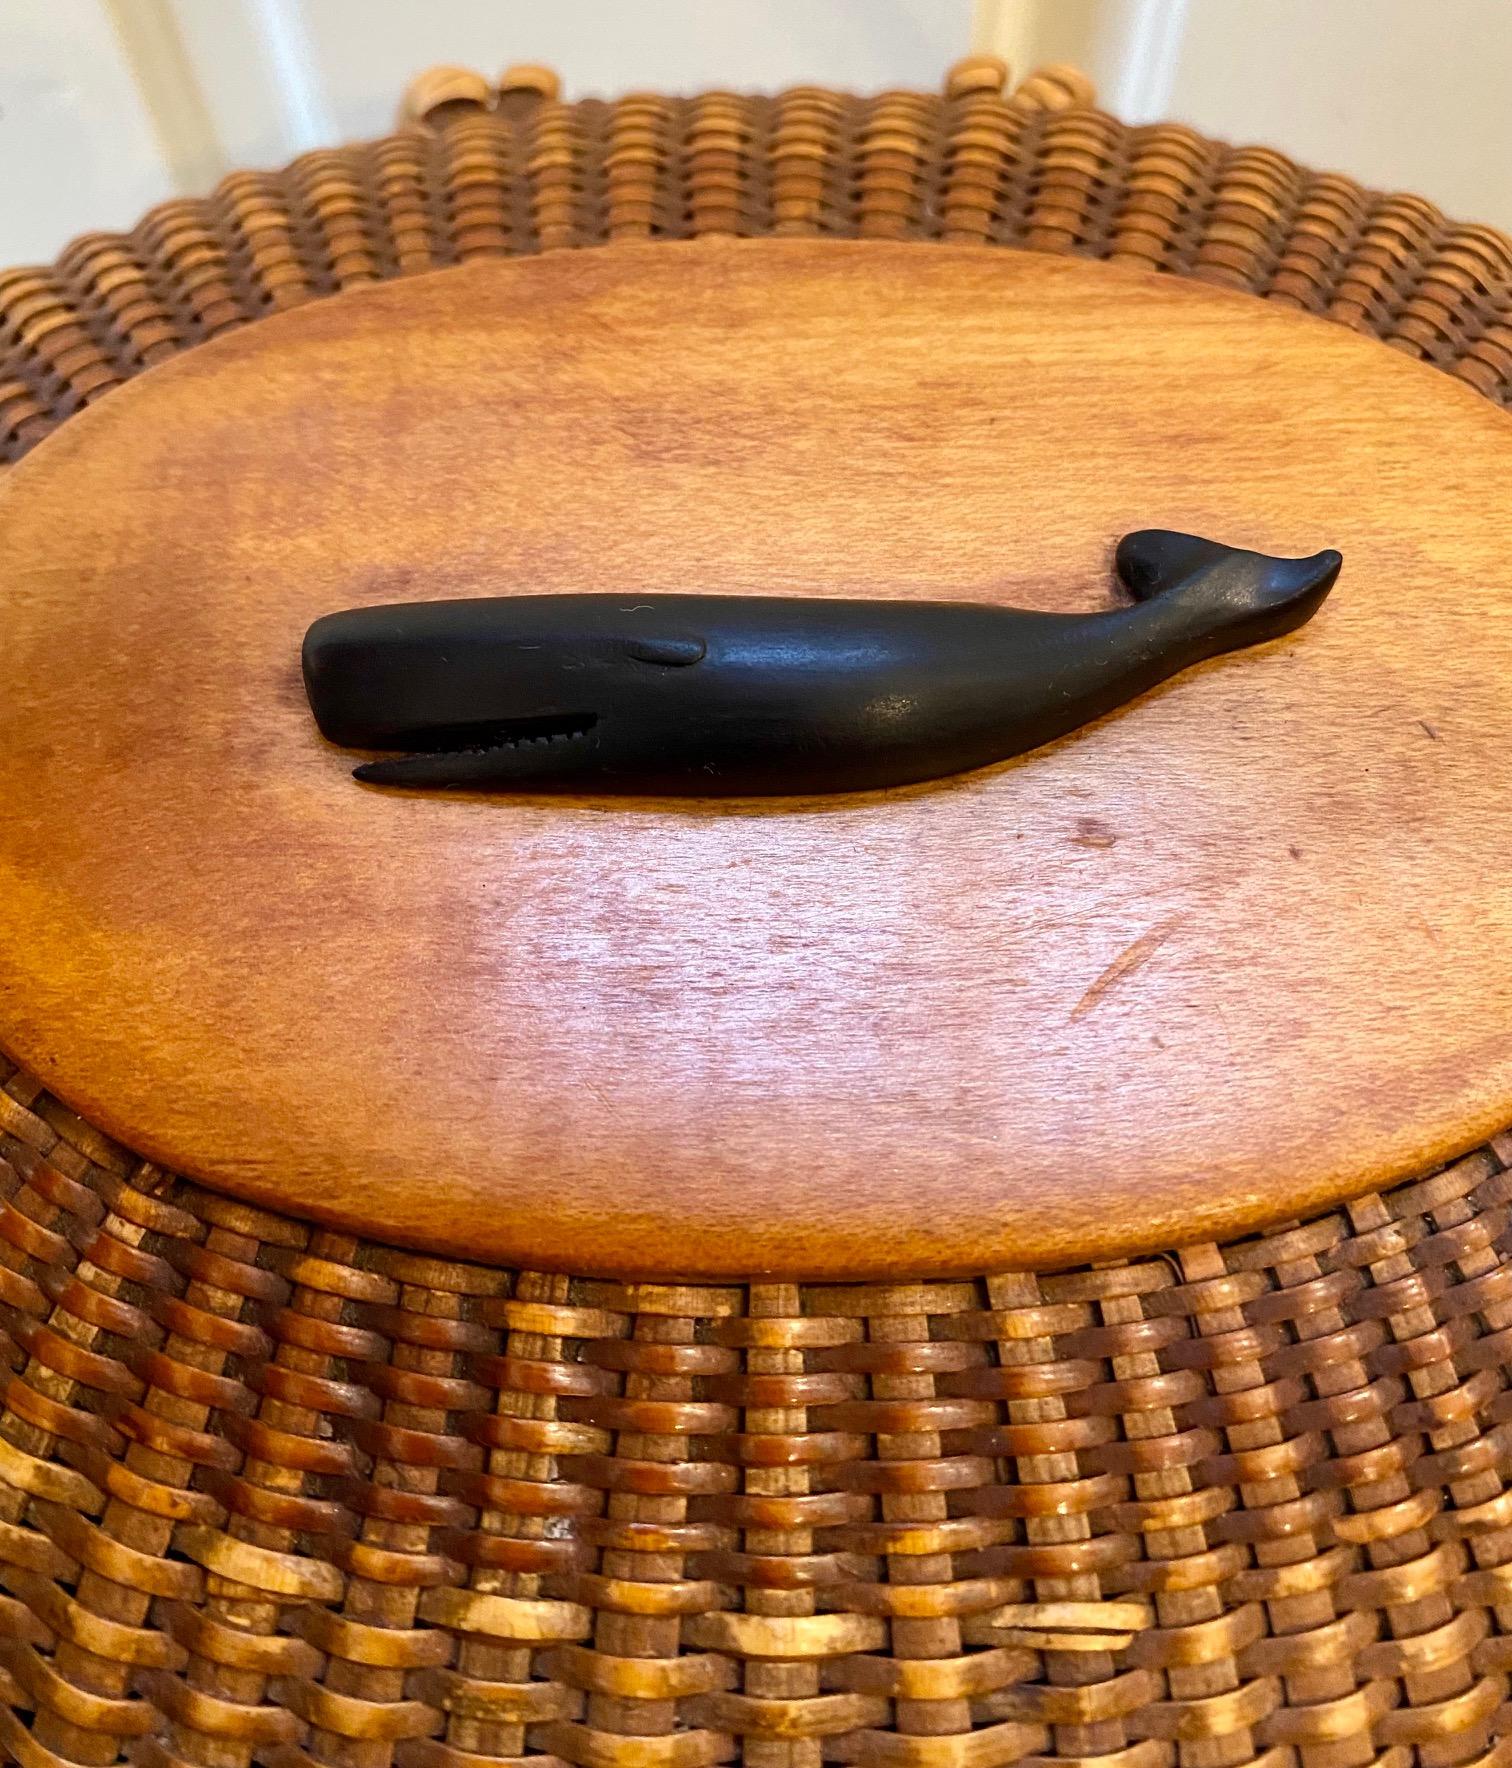 Very early vintage Nantucket Purse by Jose Formoso Reyes (1902 - 1980), Nantucket, circa 1950, an oval covered basket in the form of a woman's purse with cane staves and weave, shaped swing handle attached to rim by copper rivets, a carved ebony